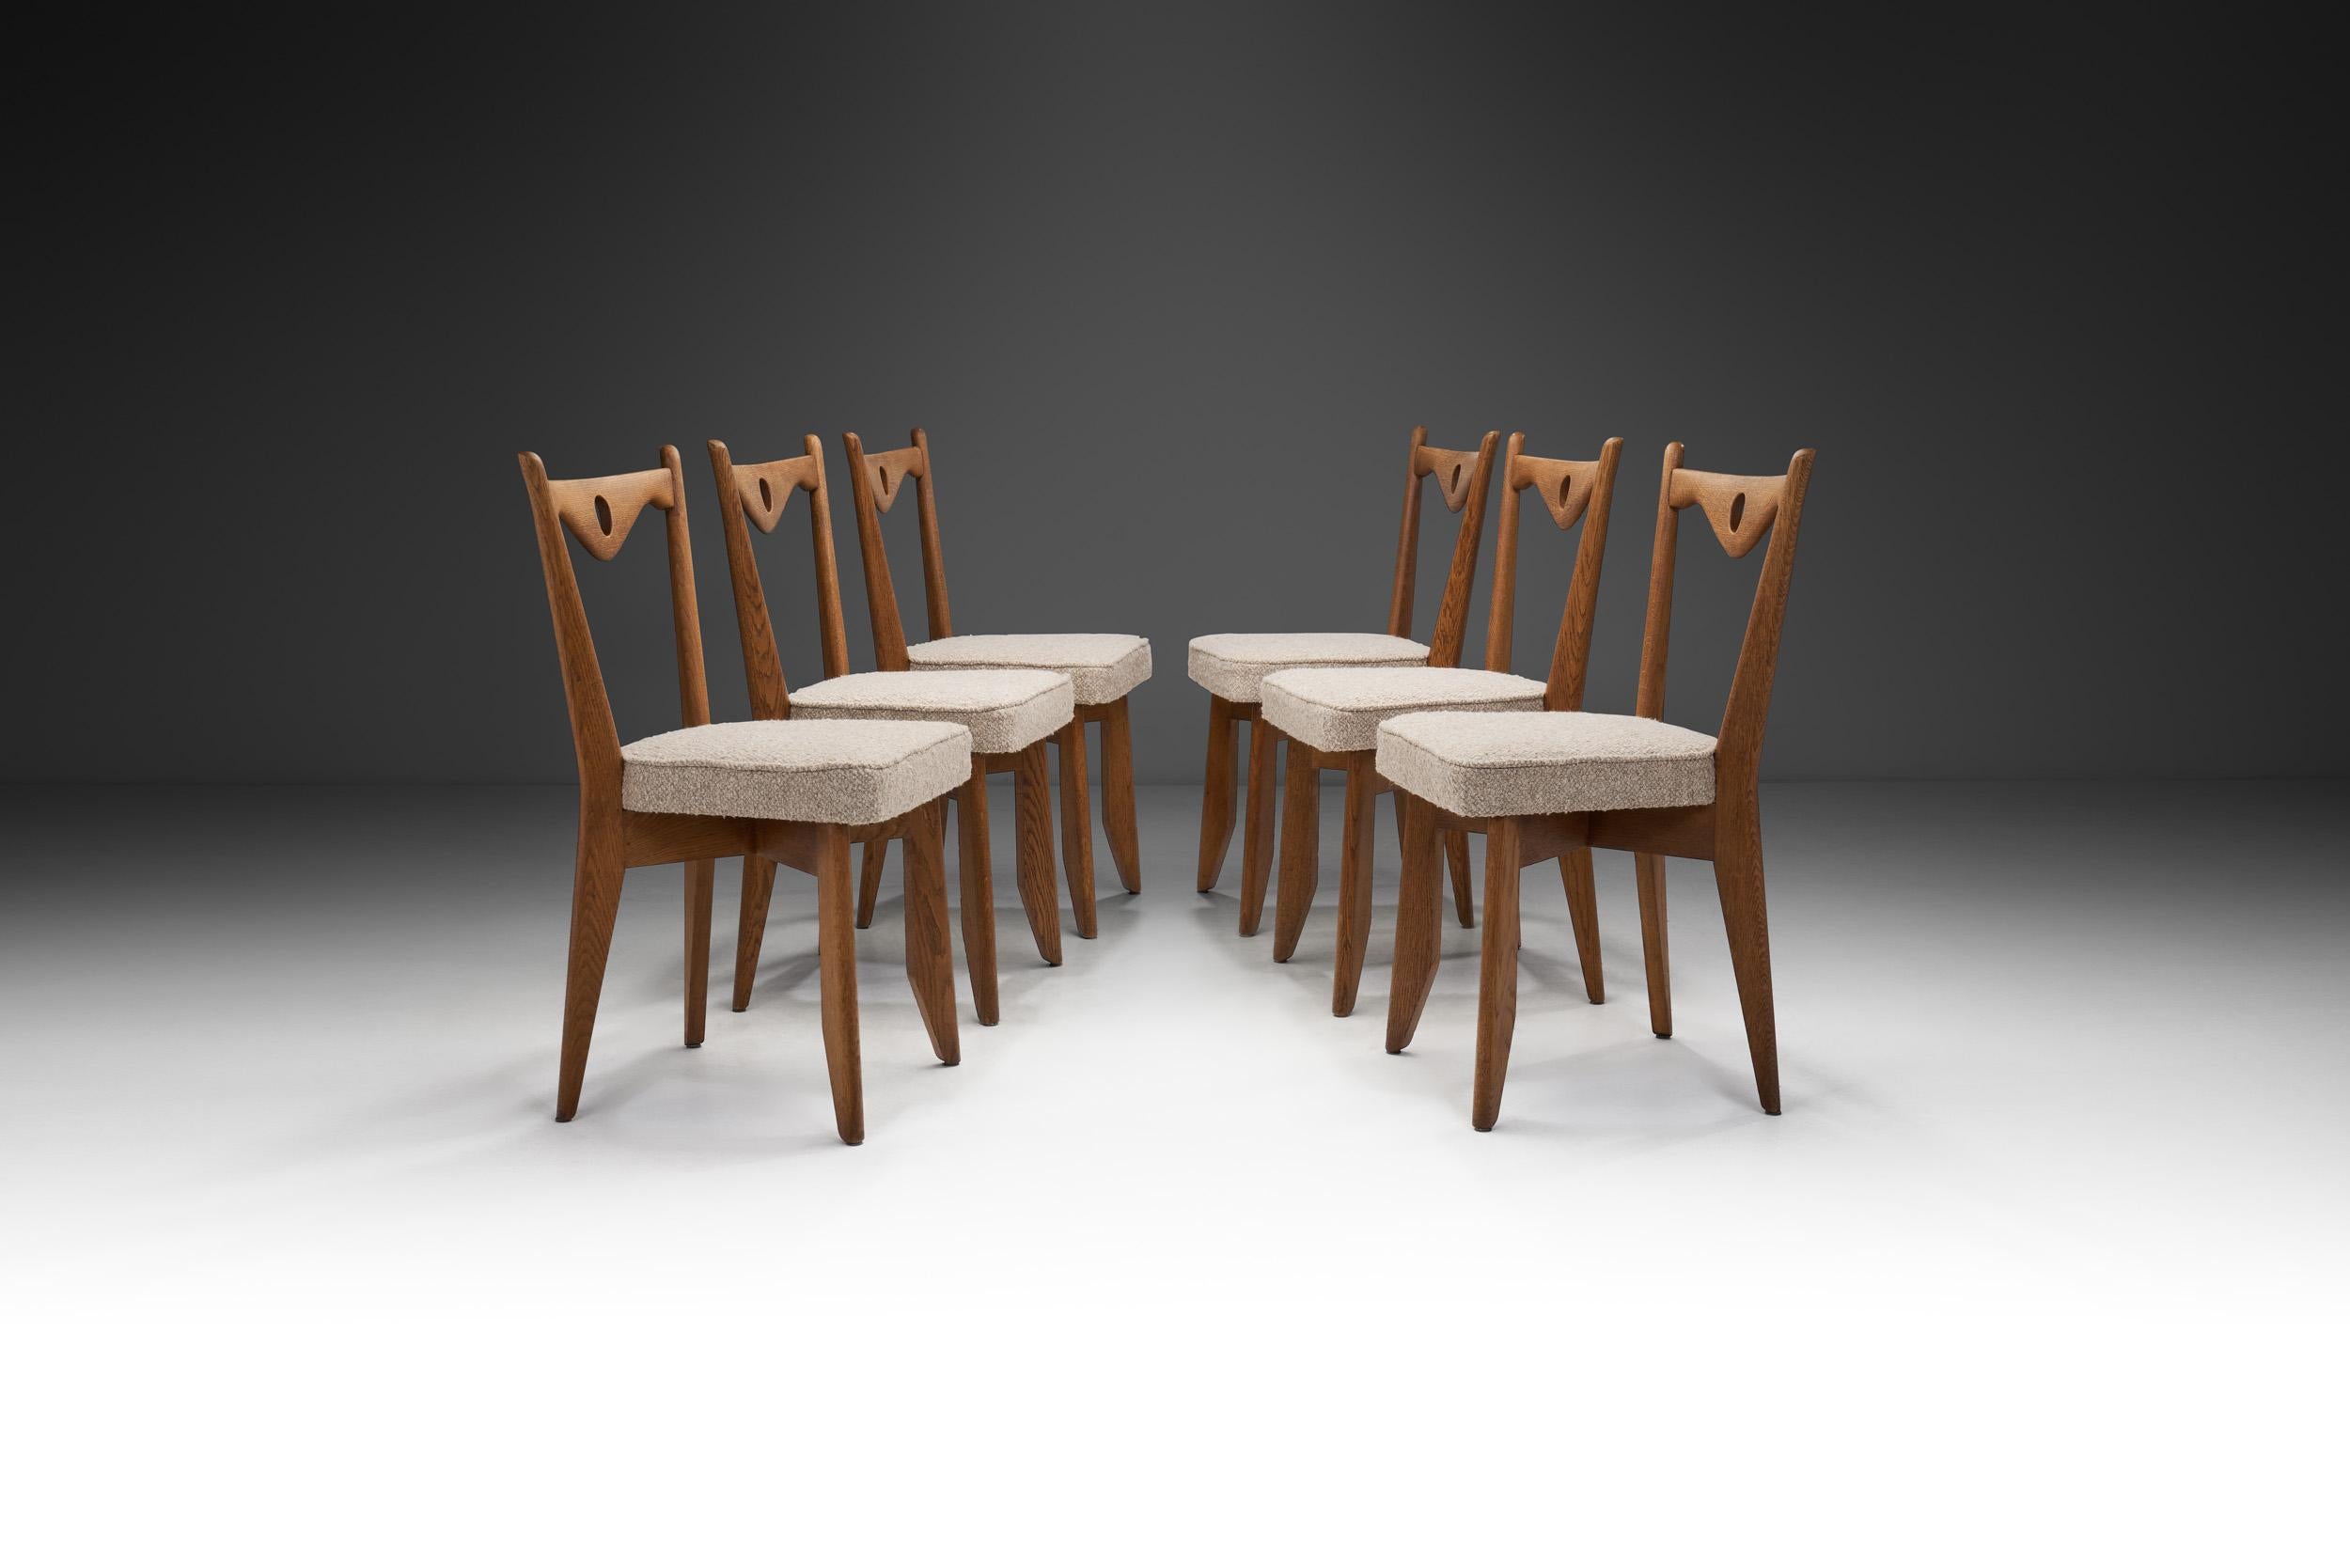 This rare set of six chairs by the French designers Guillerme et Chambron, has an elegant appearance combined with distinctive design elements, mainly the distinctive, triangular curved bars with a hole in each one.

The chairs have the classic